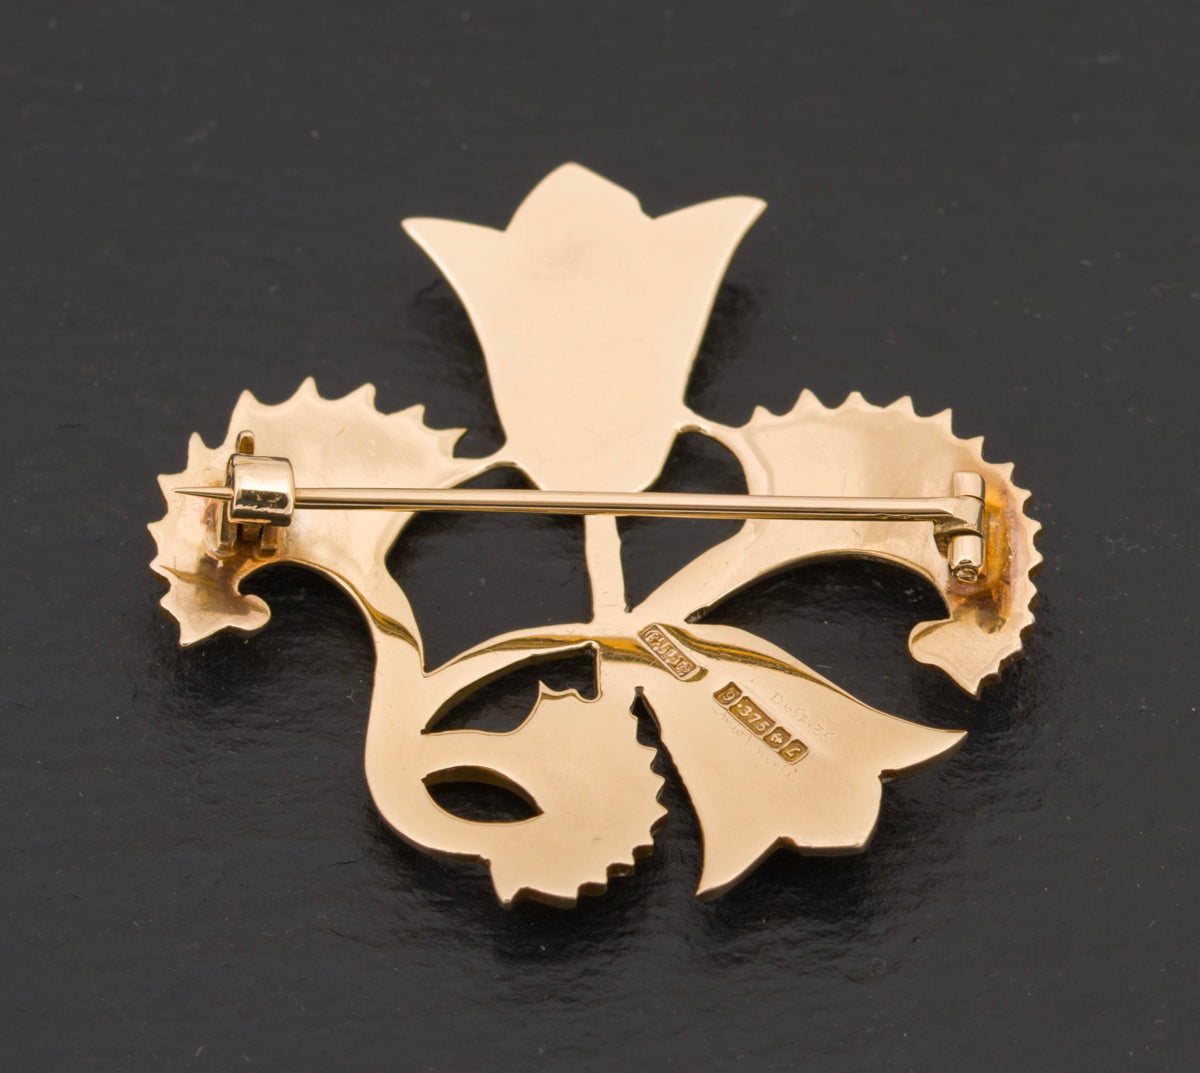 Vintage Geoffrey Bellamy Solid 9ct Gold Lotus Flower Brooch With Provenance (A1530)